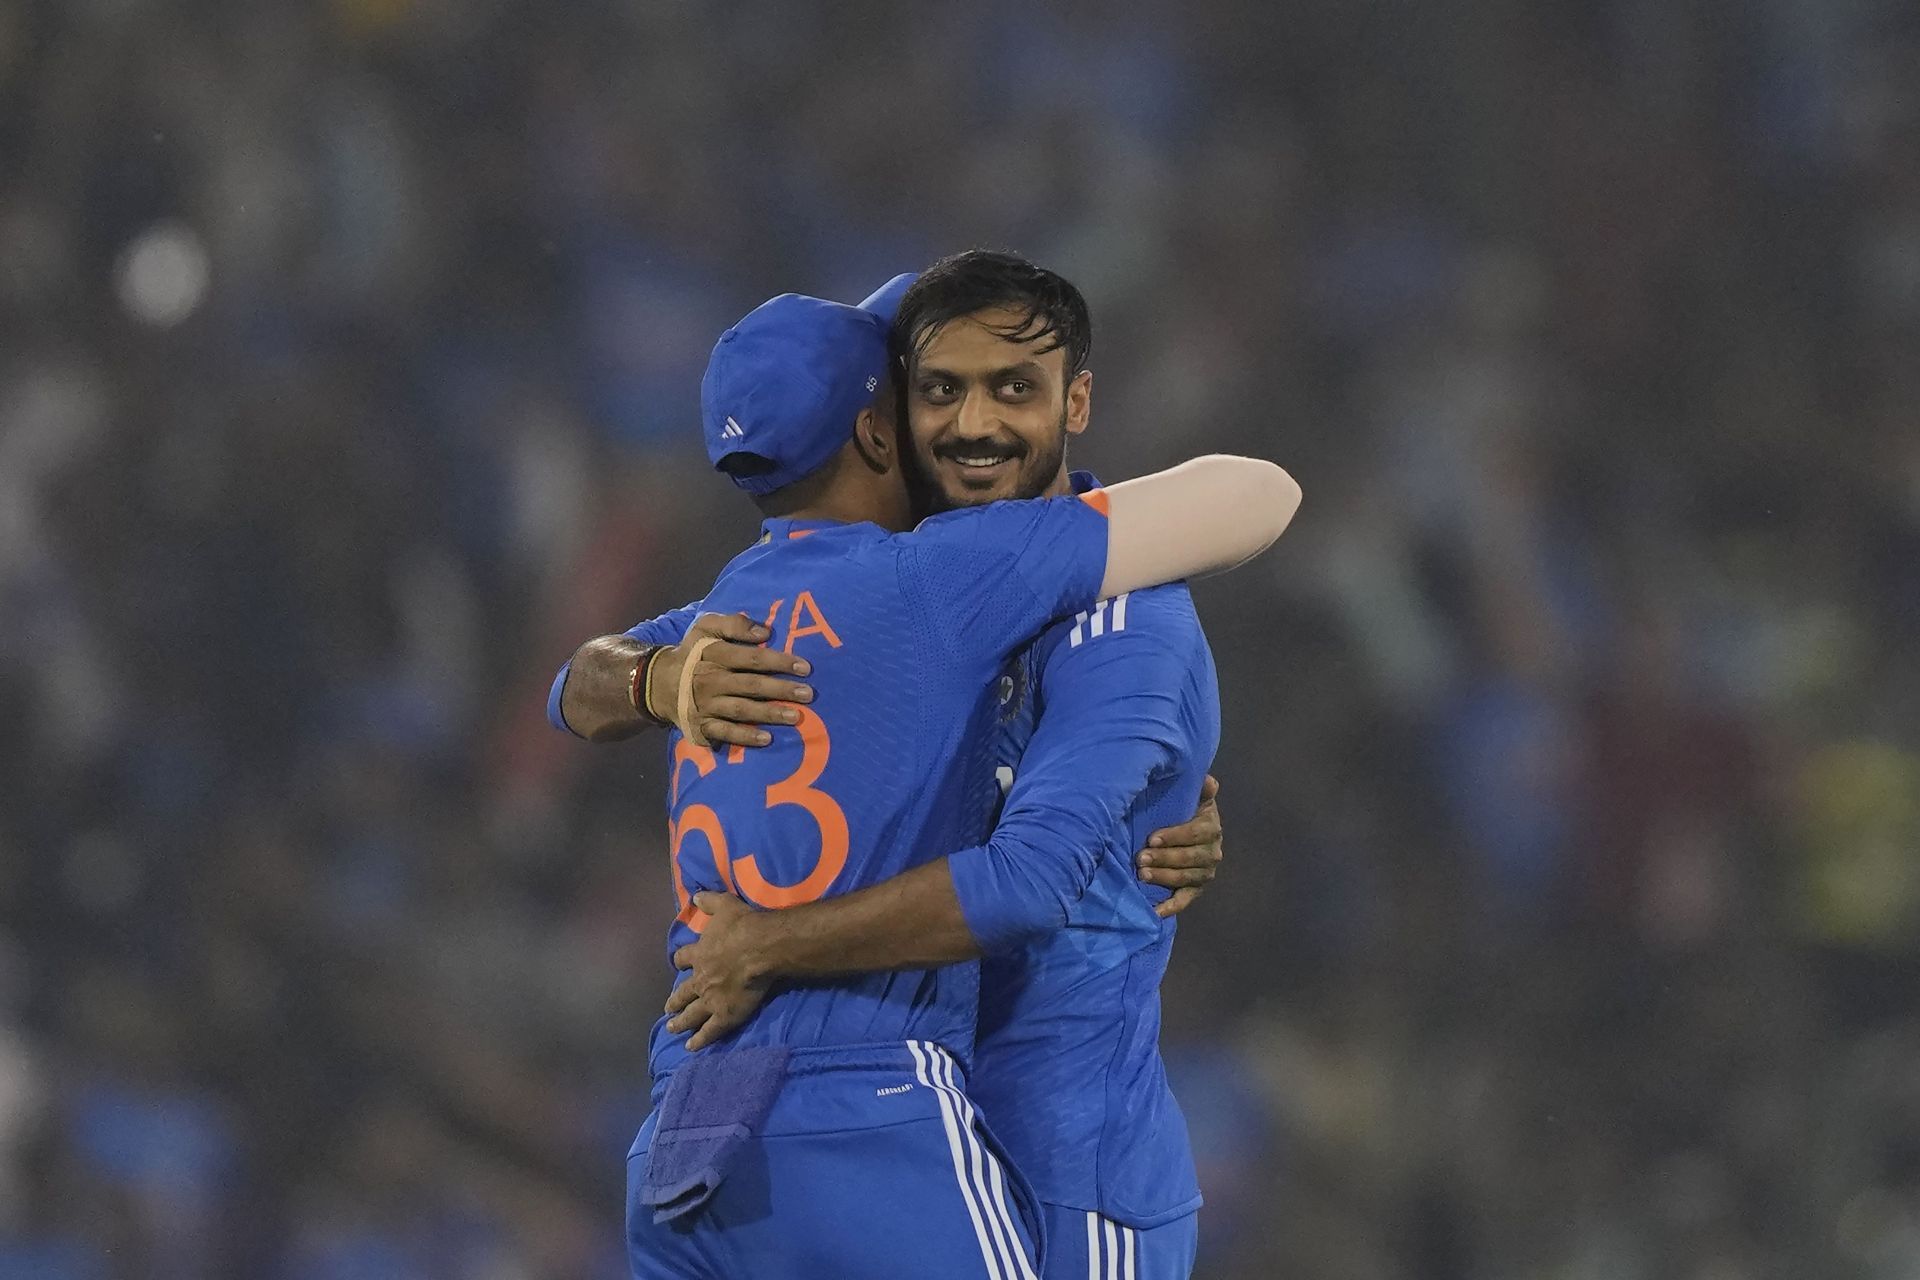 Axar Patel was the pick of the Indian bowlers,